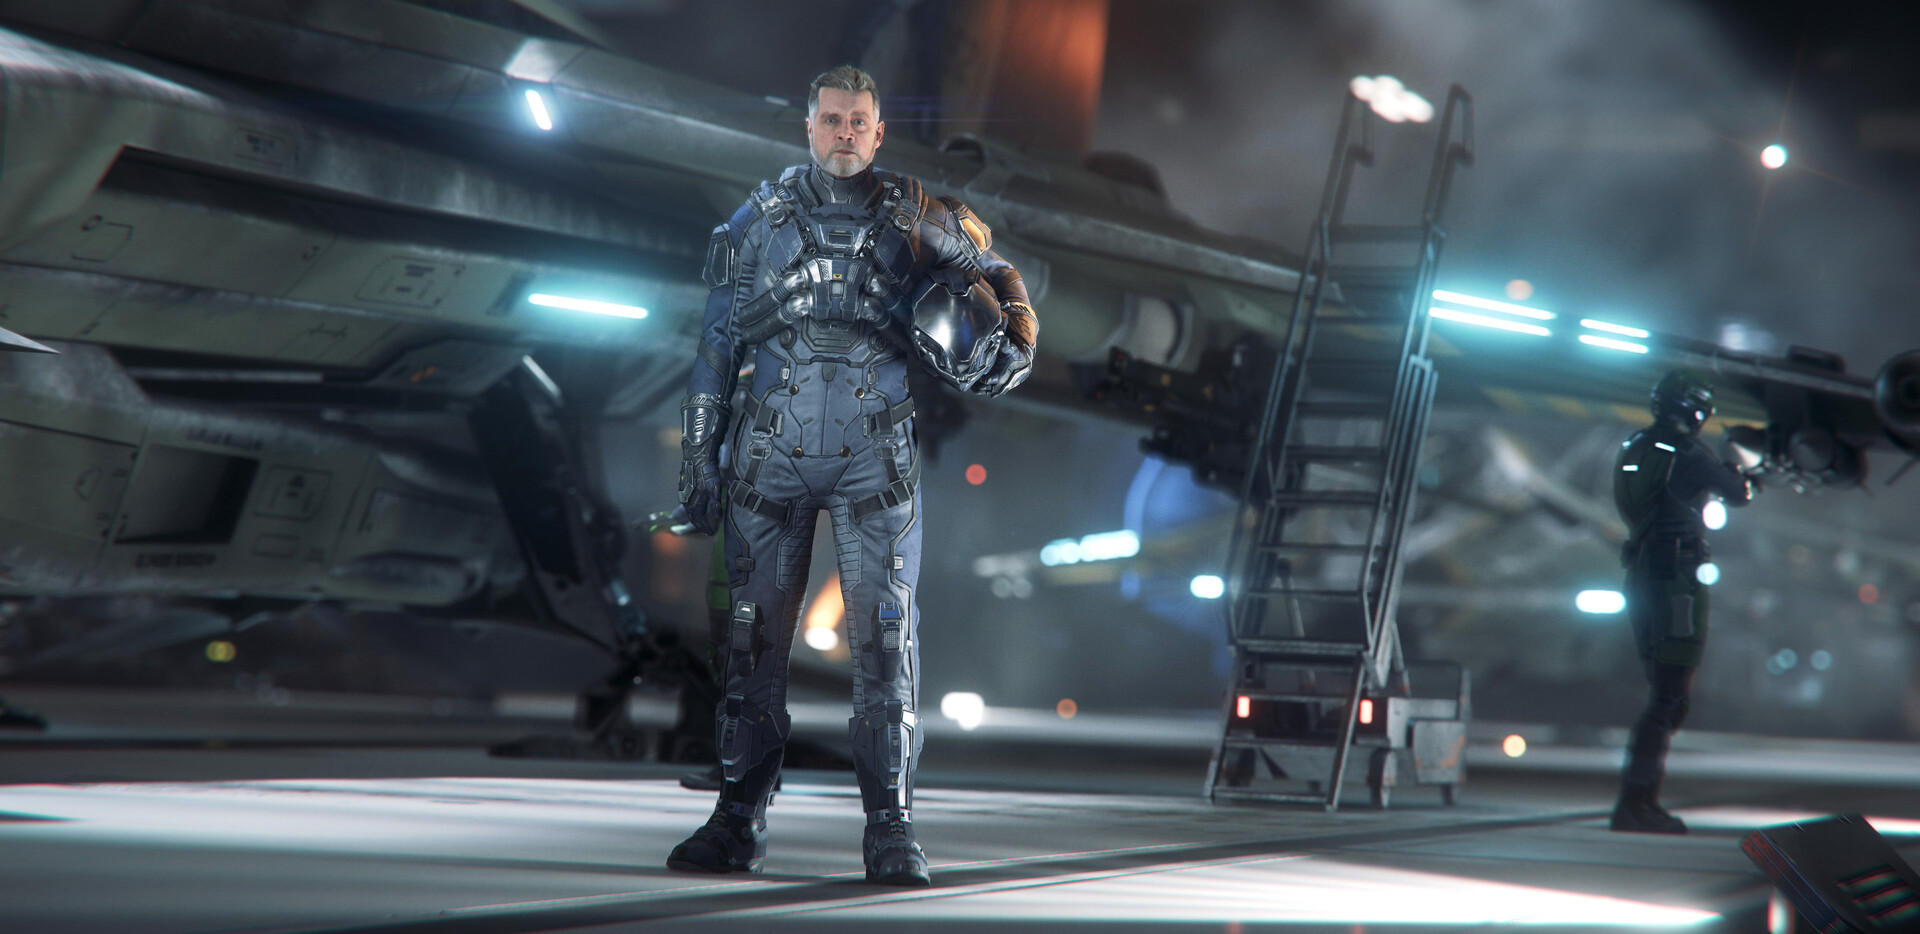 Star Citizen event shows off new content, but a release date and Squadron  42 remain absent